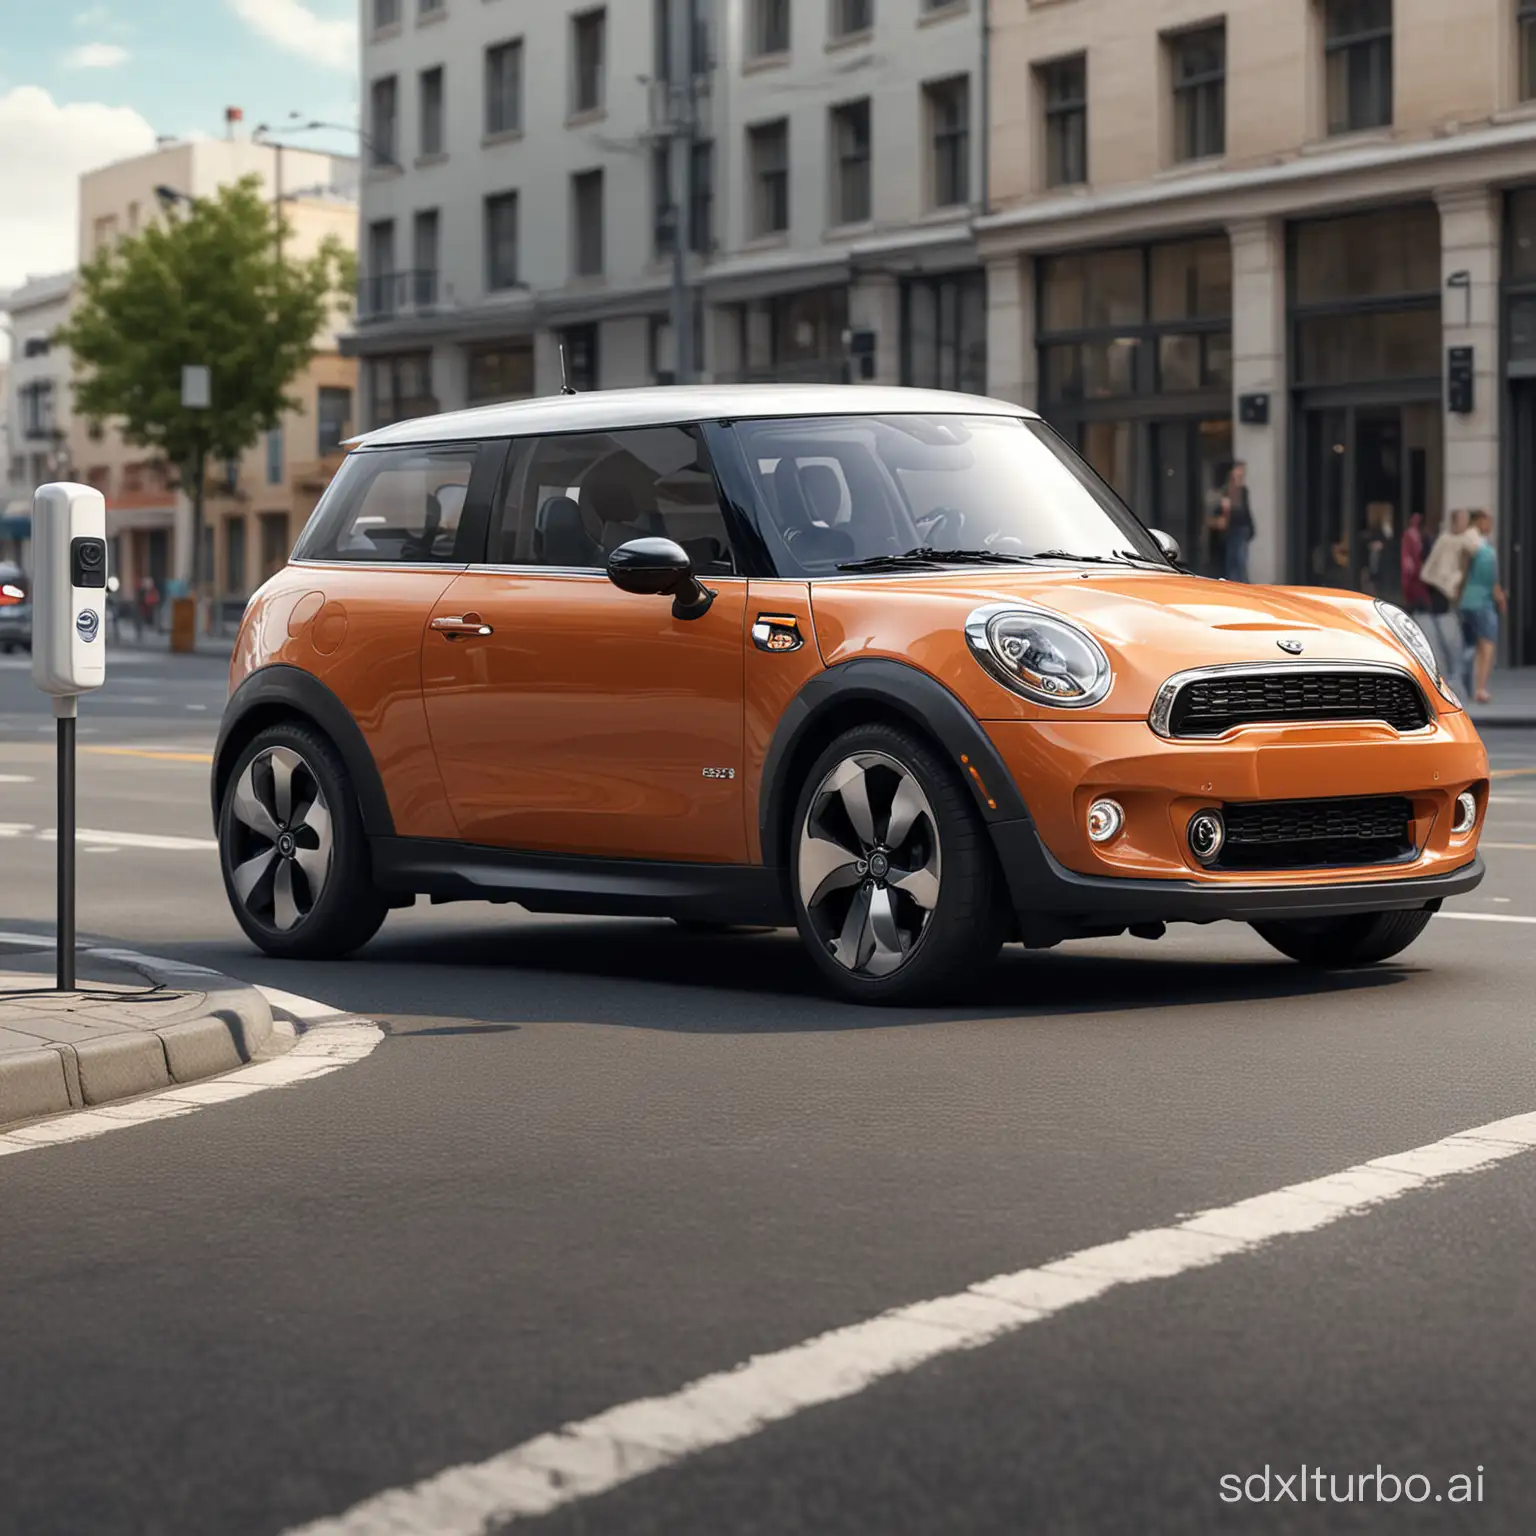 Electric car, realistic style, street view, close-up, mini version, photorealistic, Medium View Distance, Future design, surreal